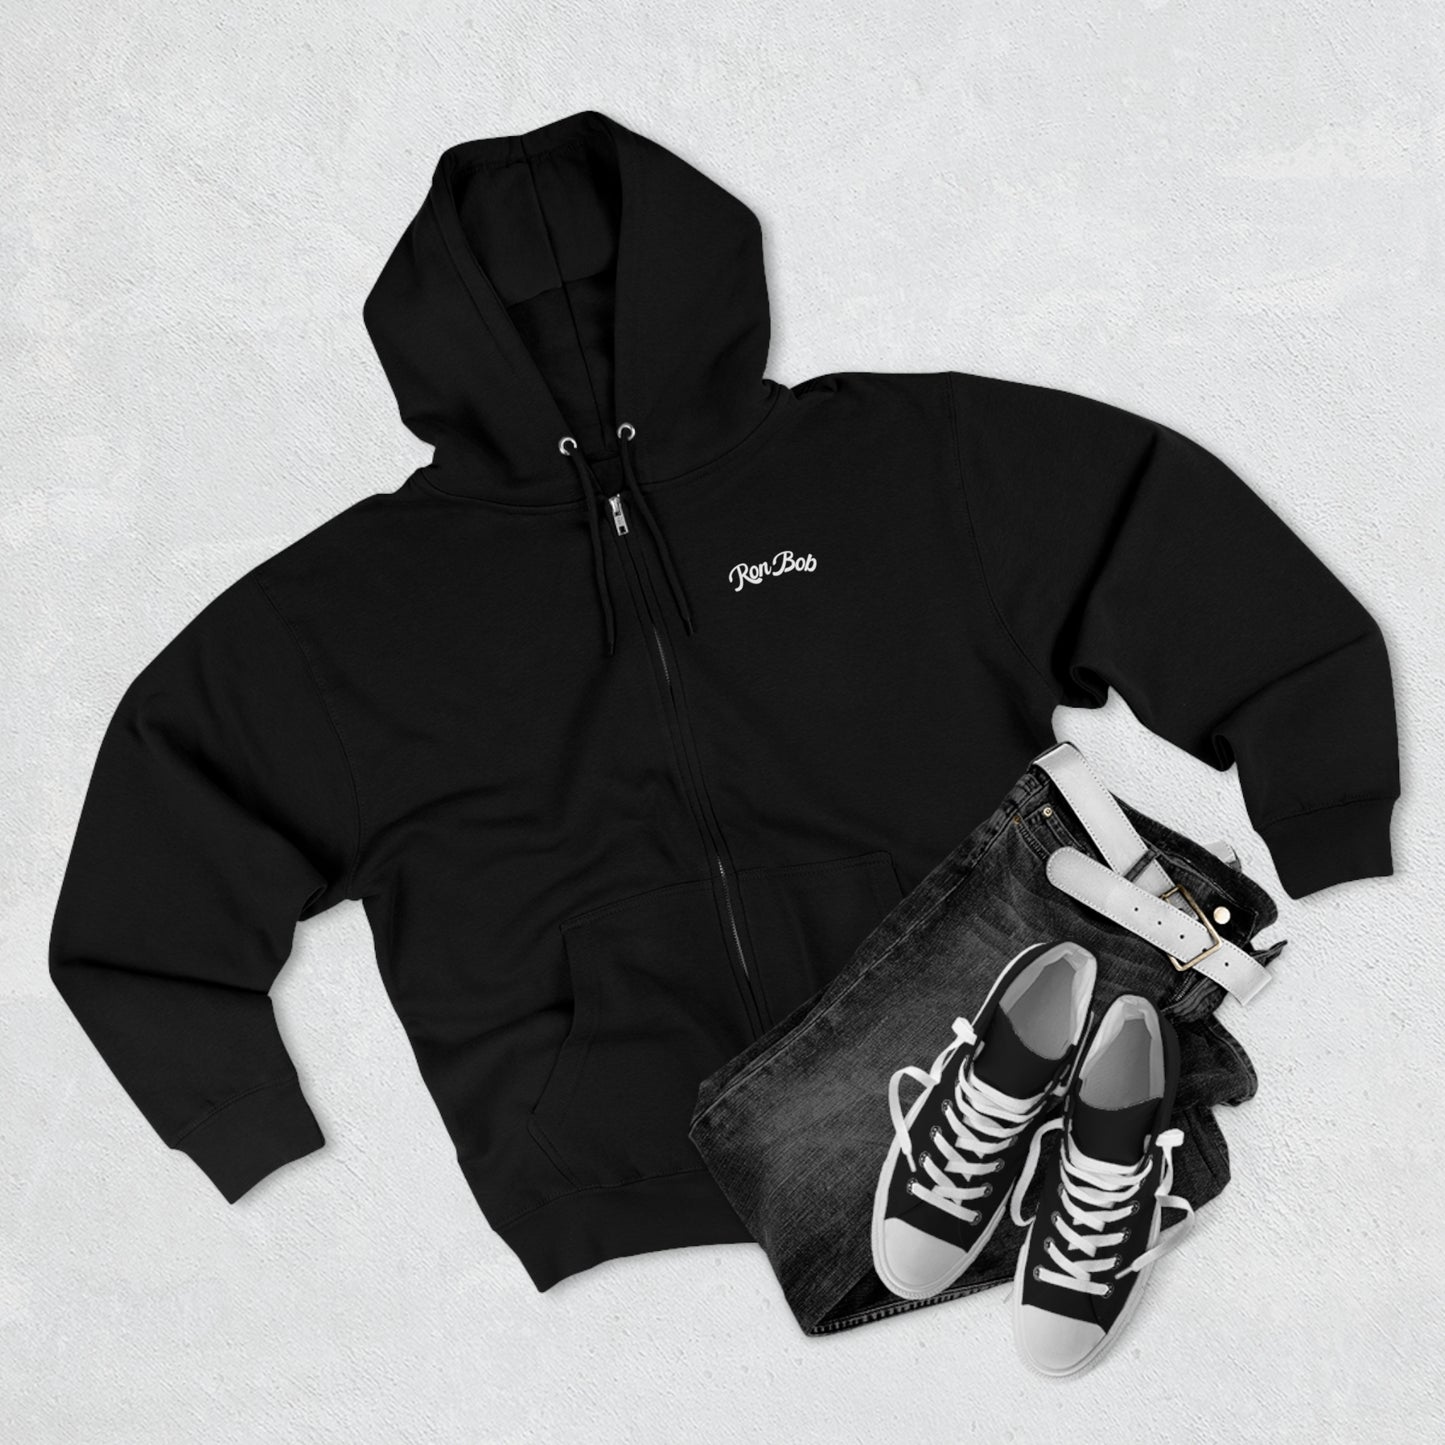 Zip Hoodie with Traditional Logo (Black)